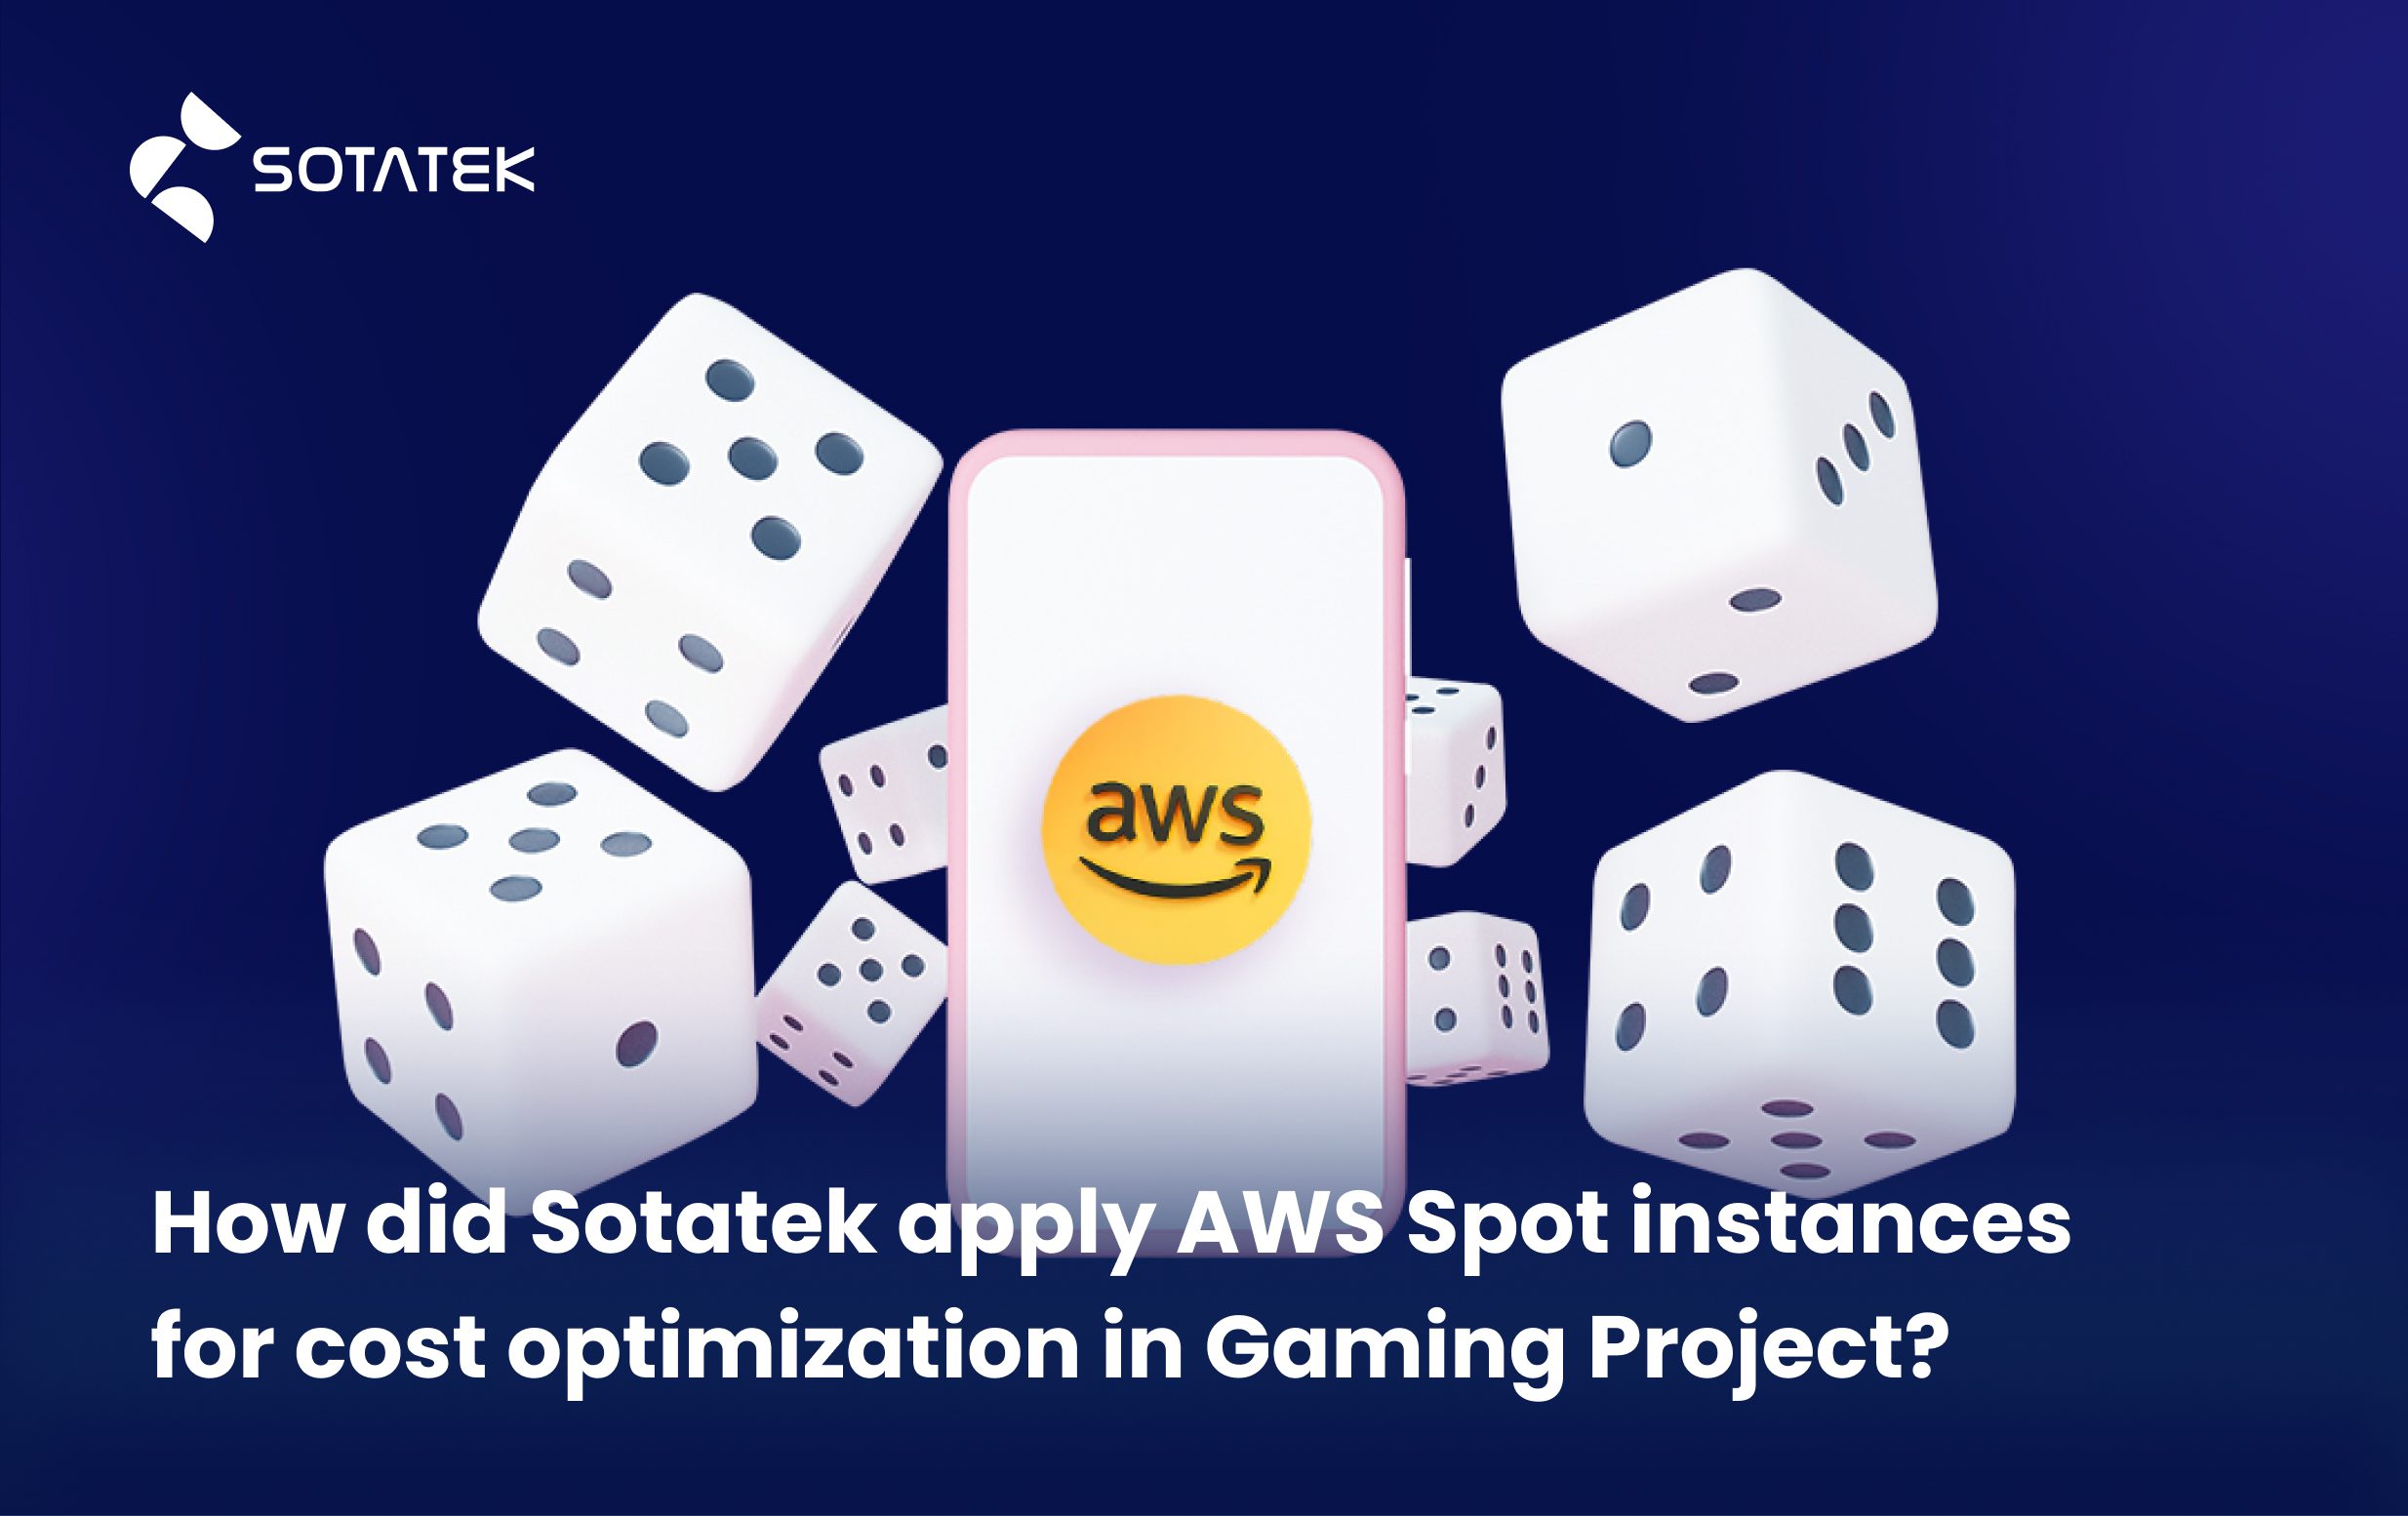 How did Sotatek apply AWS Spot instances for cost optimization in Gaming Project?